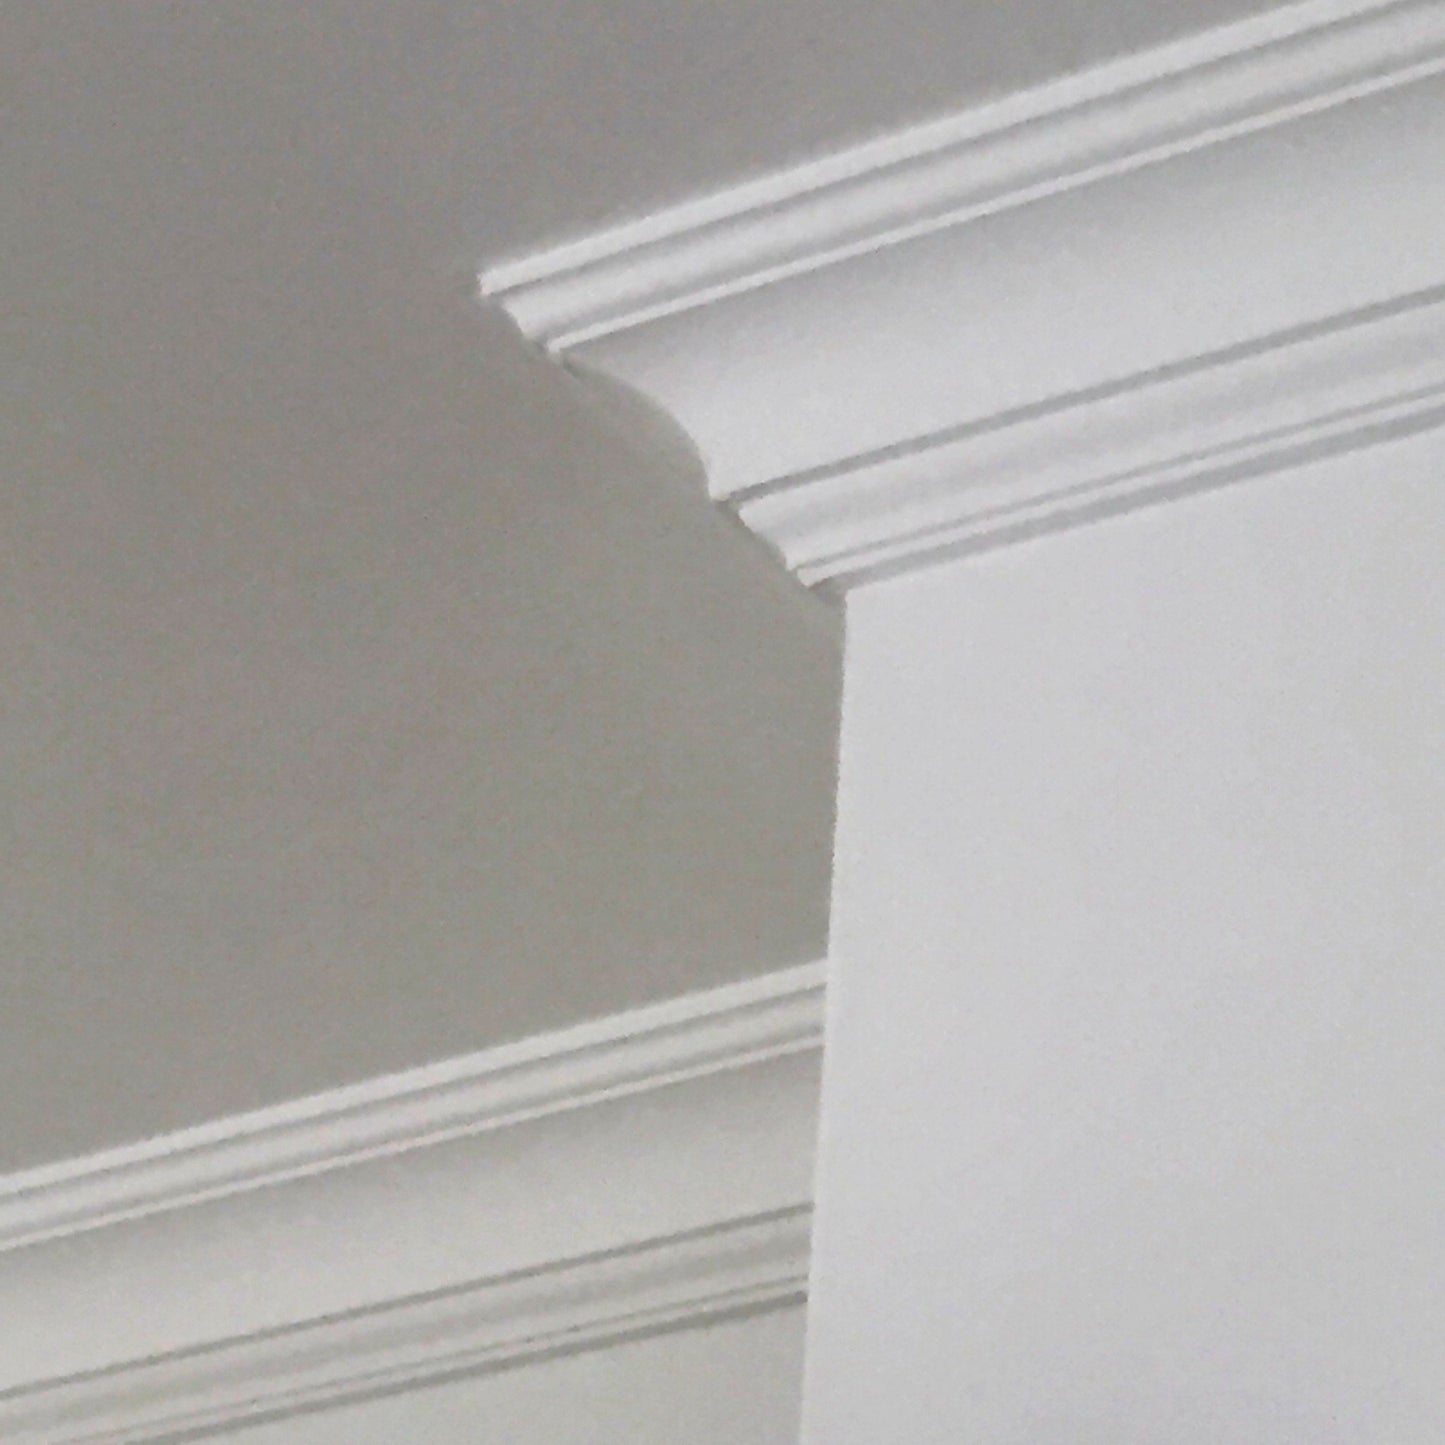 Crown - Classic Coving installed closeup